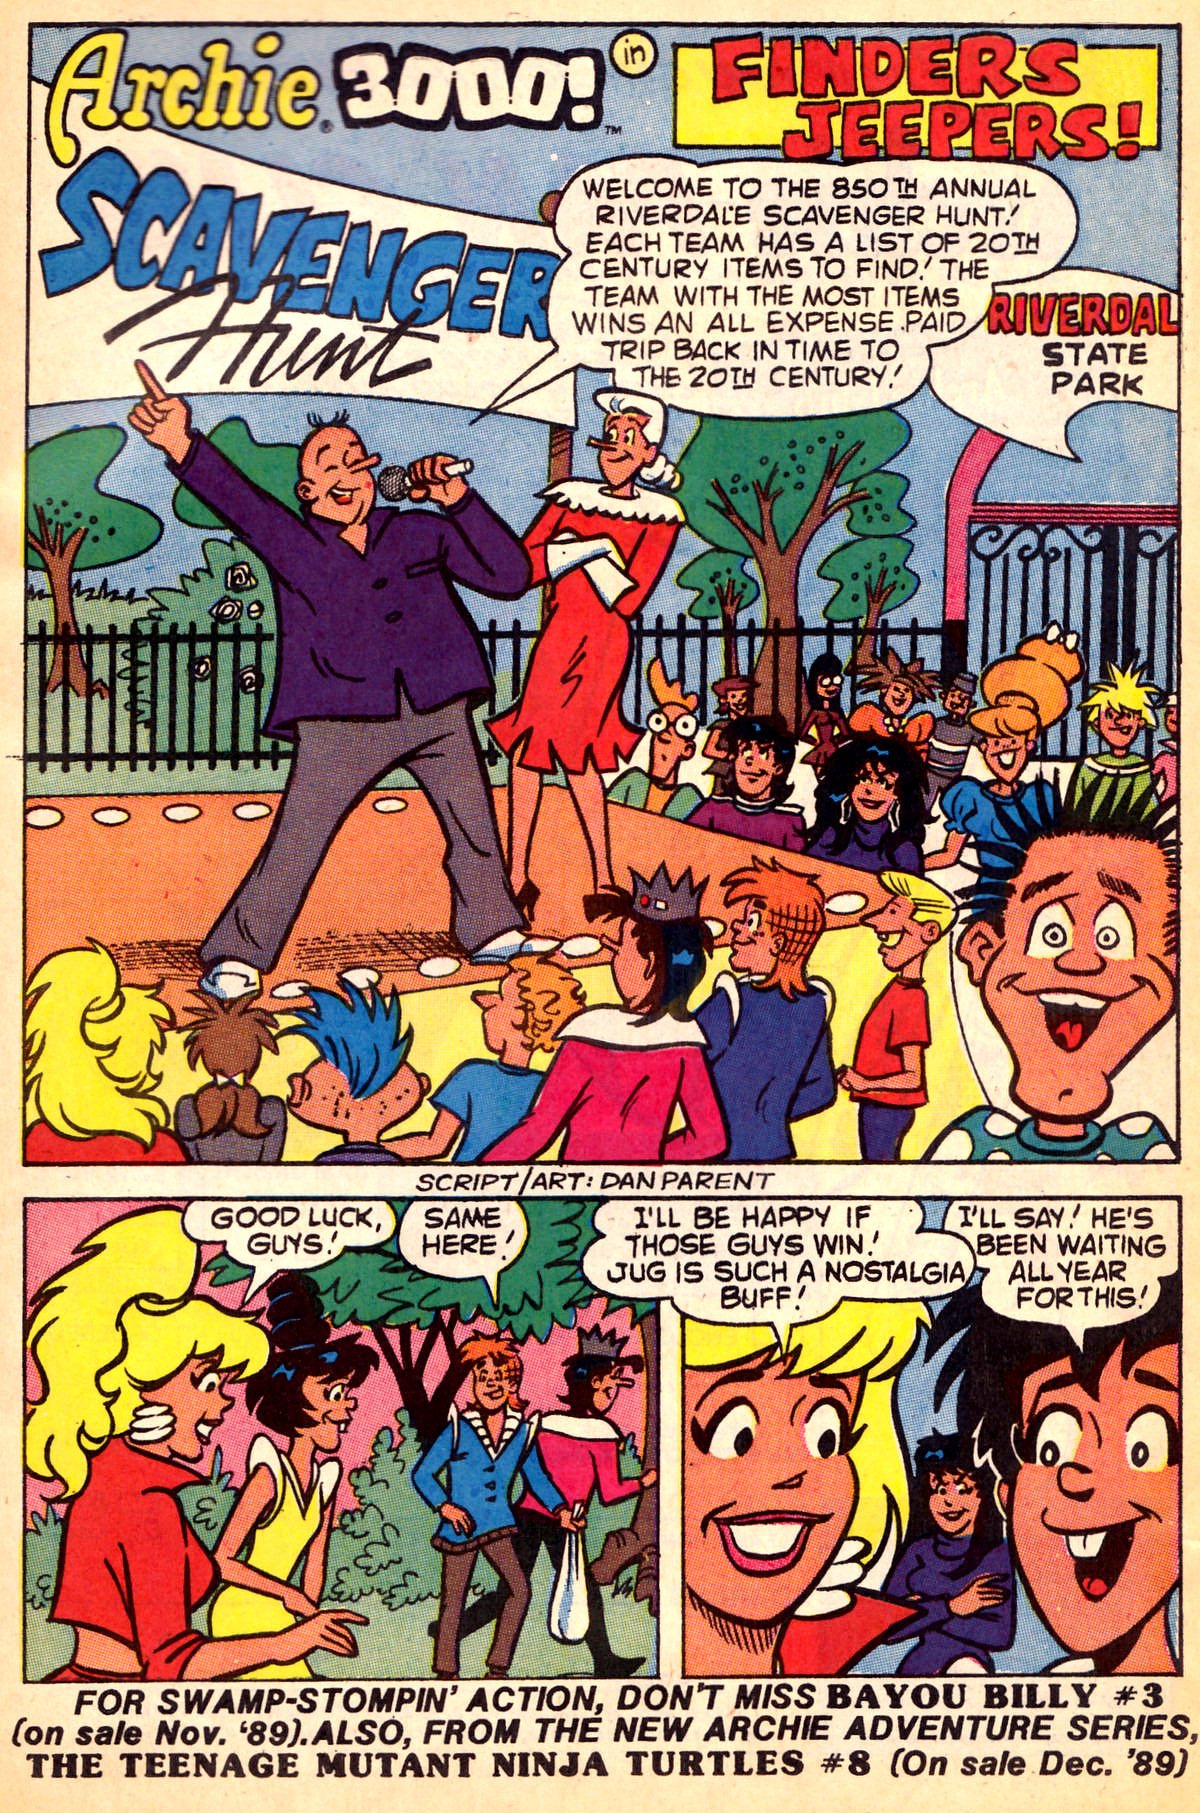 Read online Archie 3000! (1989) comic -  Issue #6 - 19